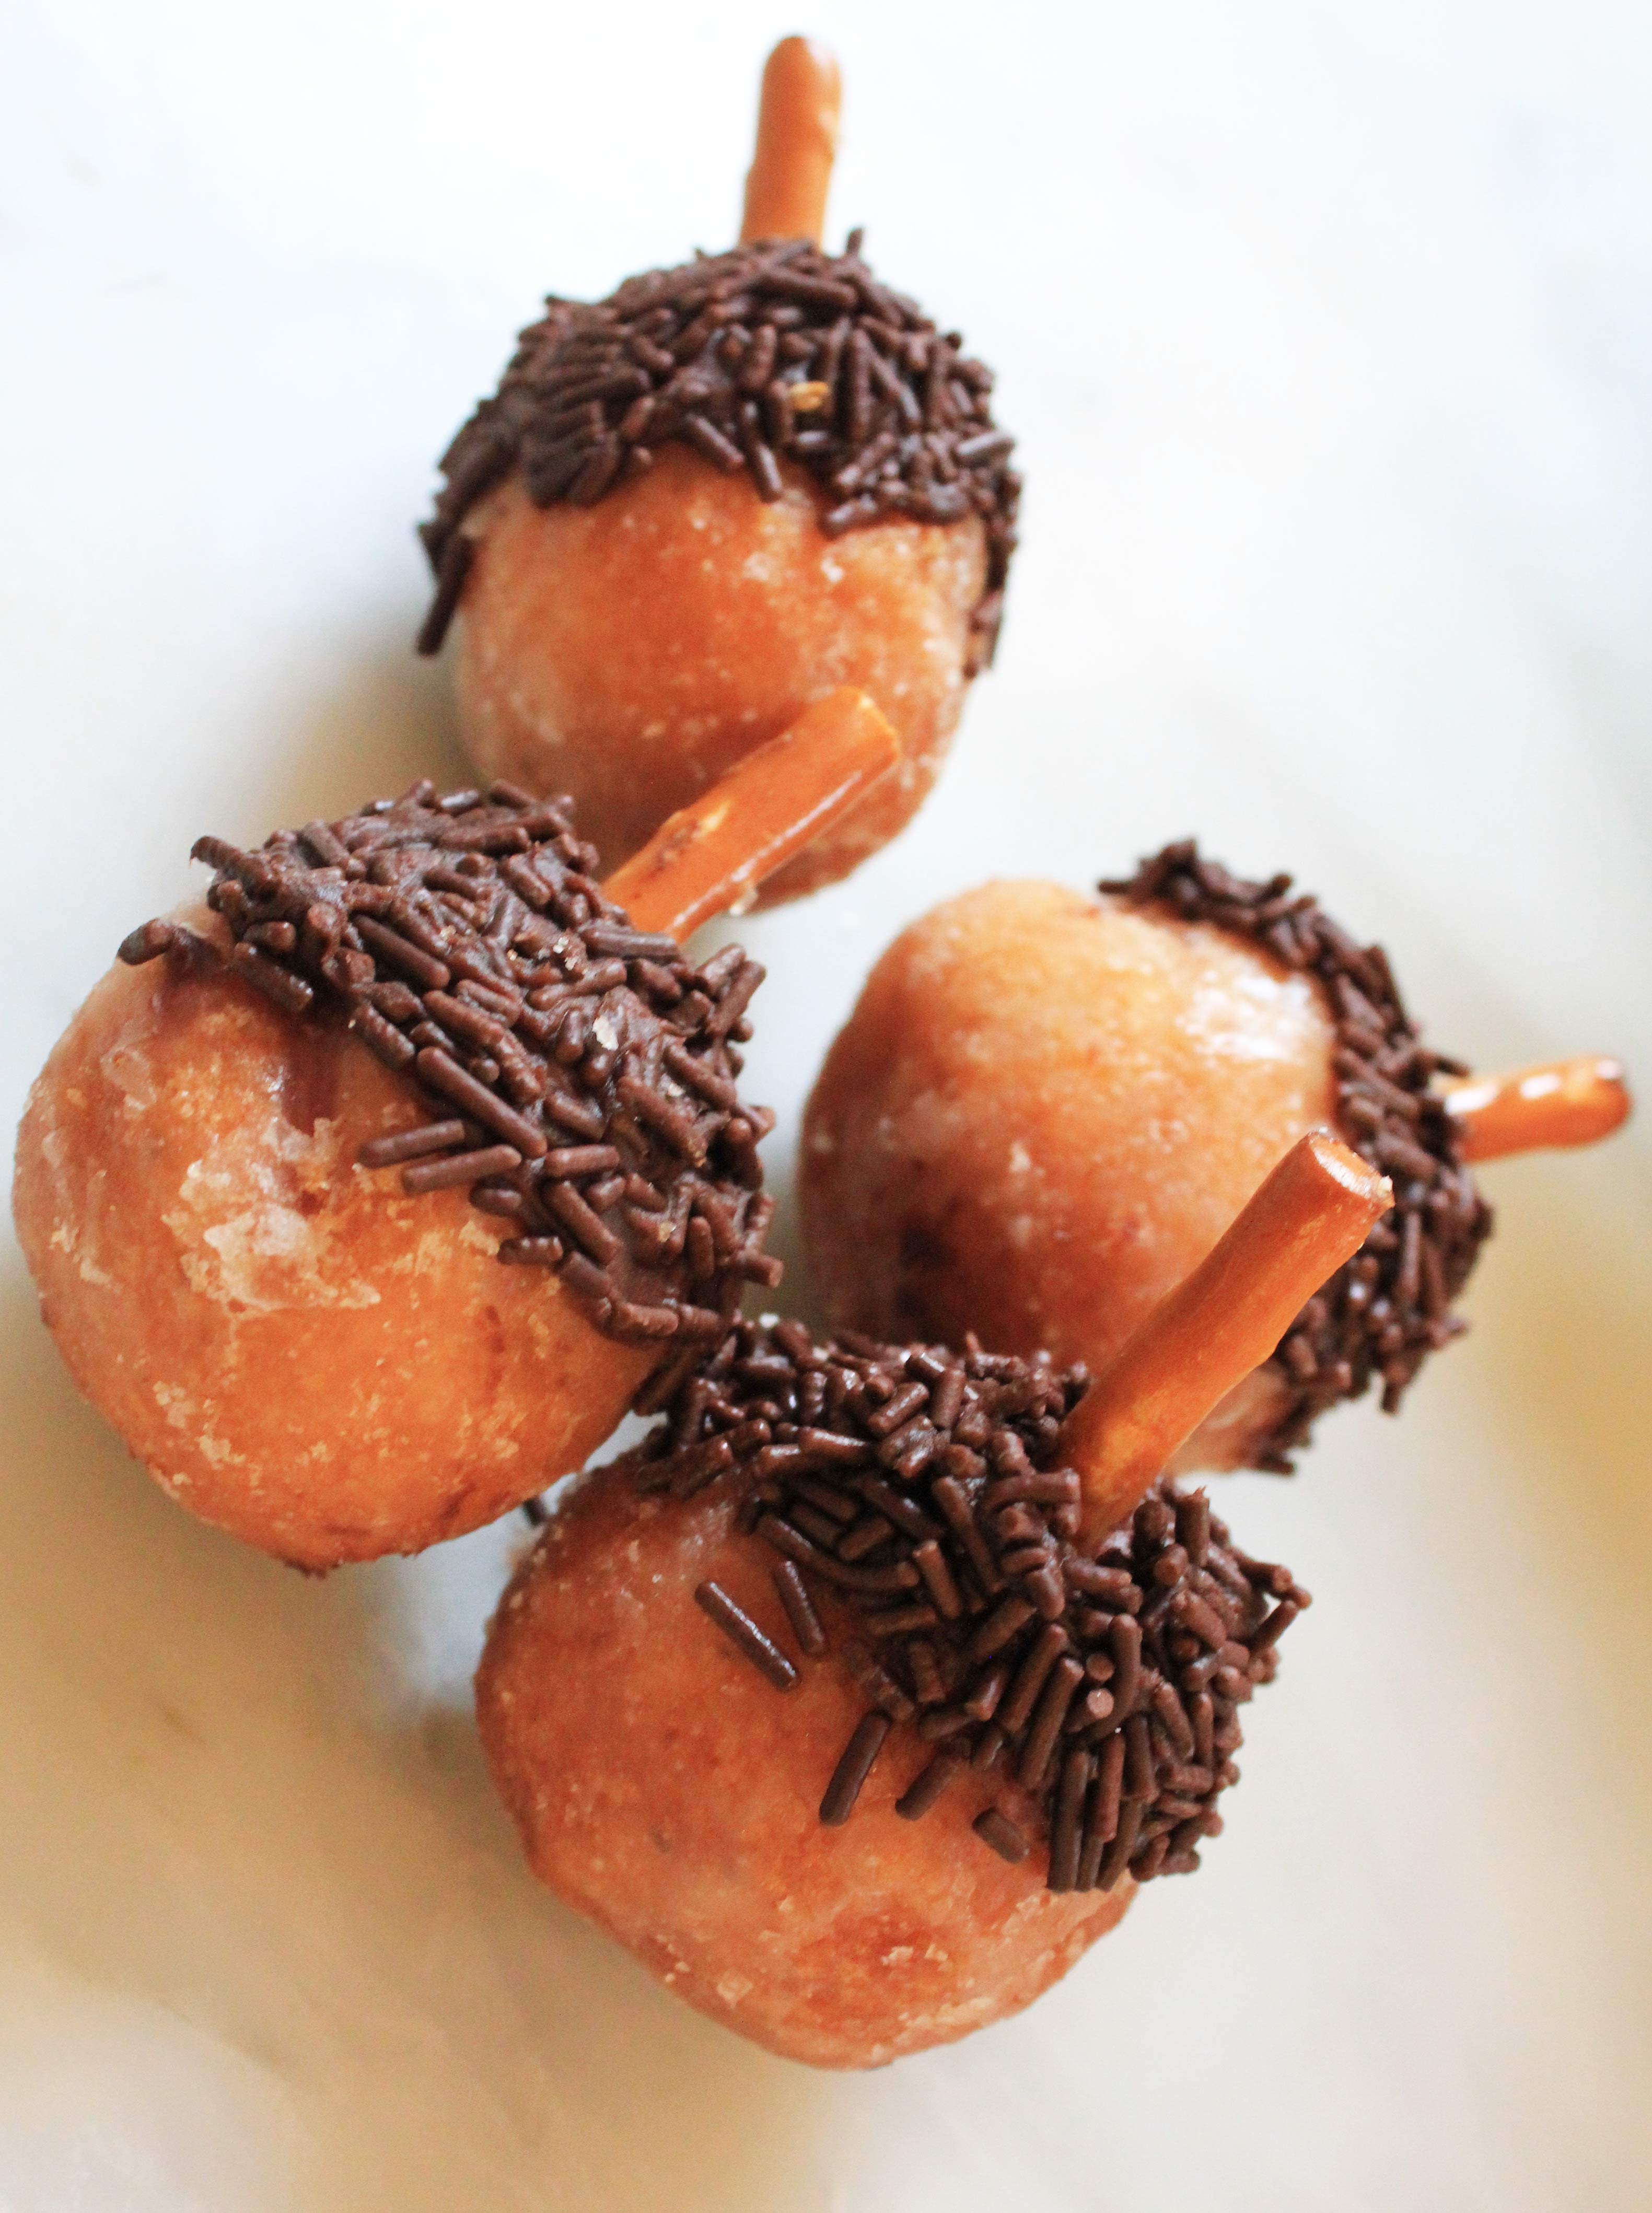 Chocolate sprinkle-covered acorn donuts